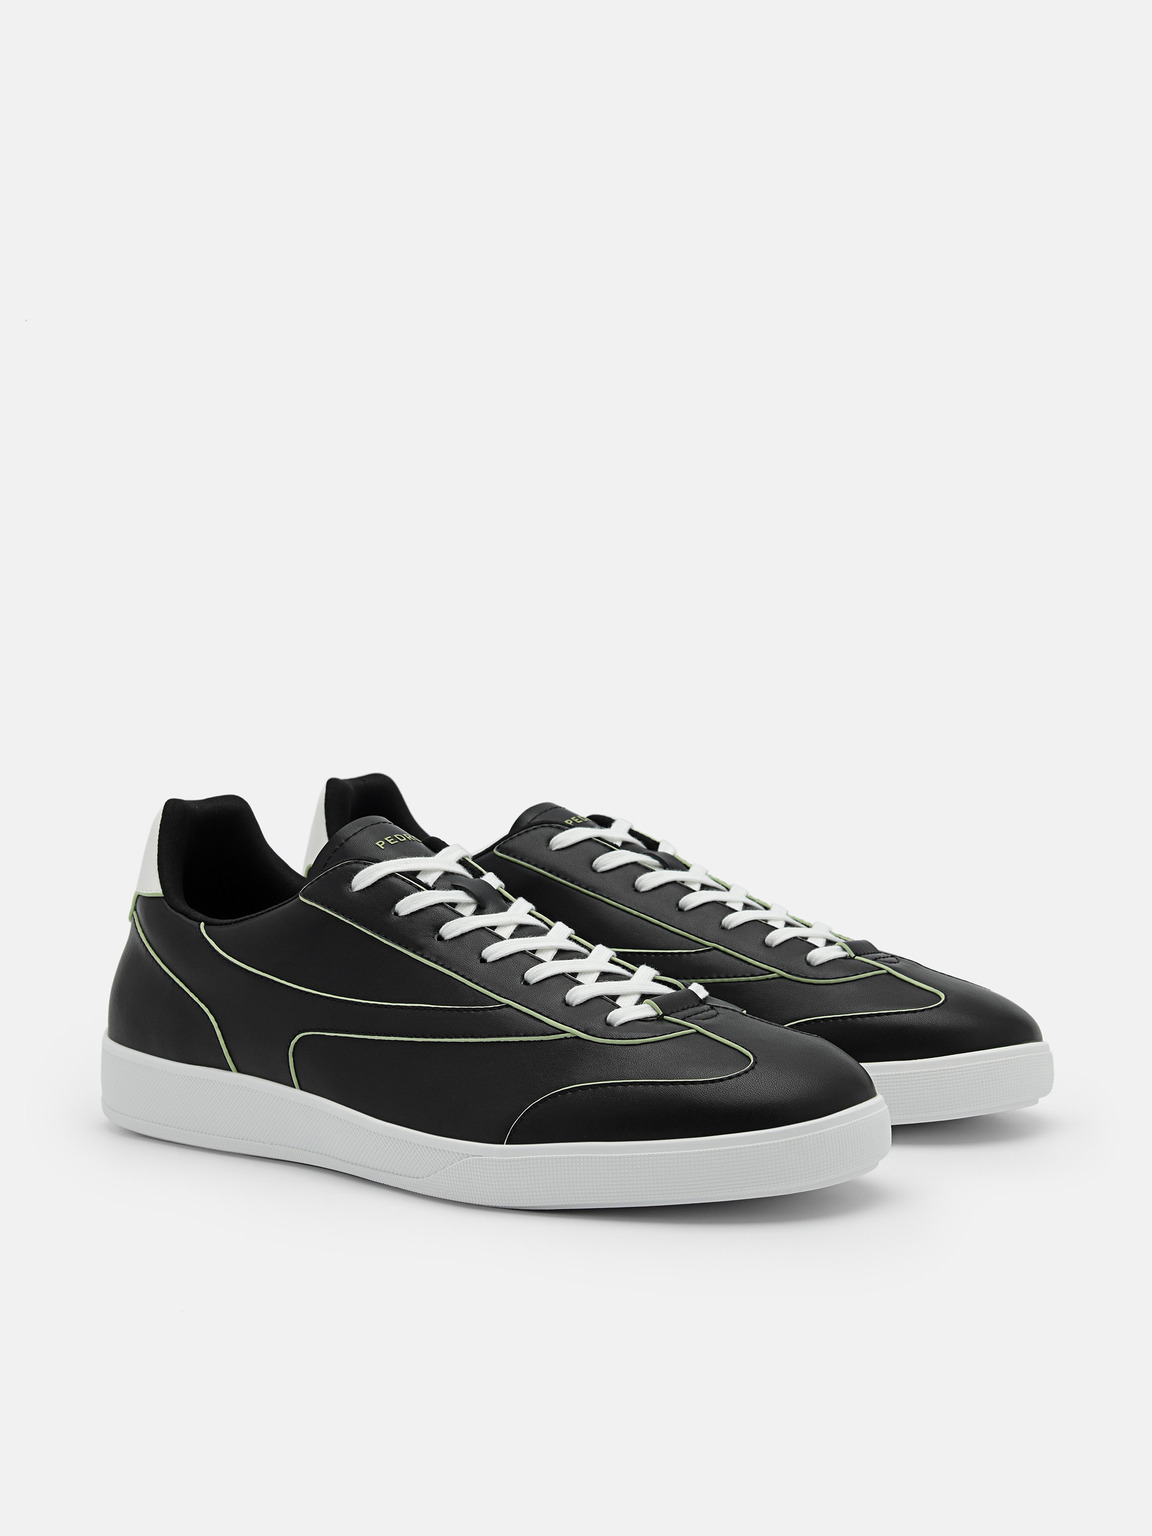 Men's rePEDRO Recycled Leather Sneakers, Black